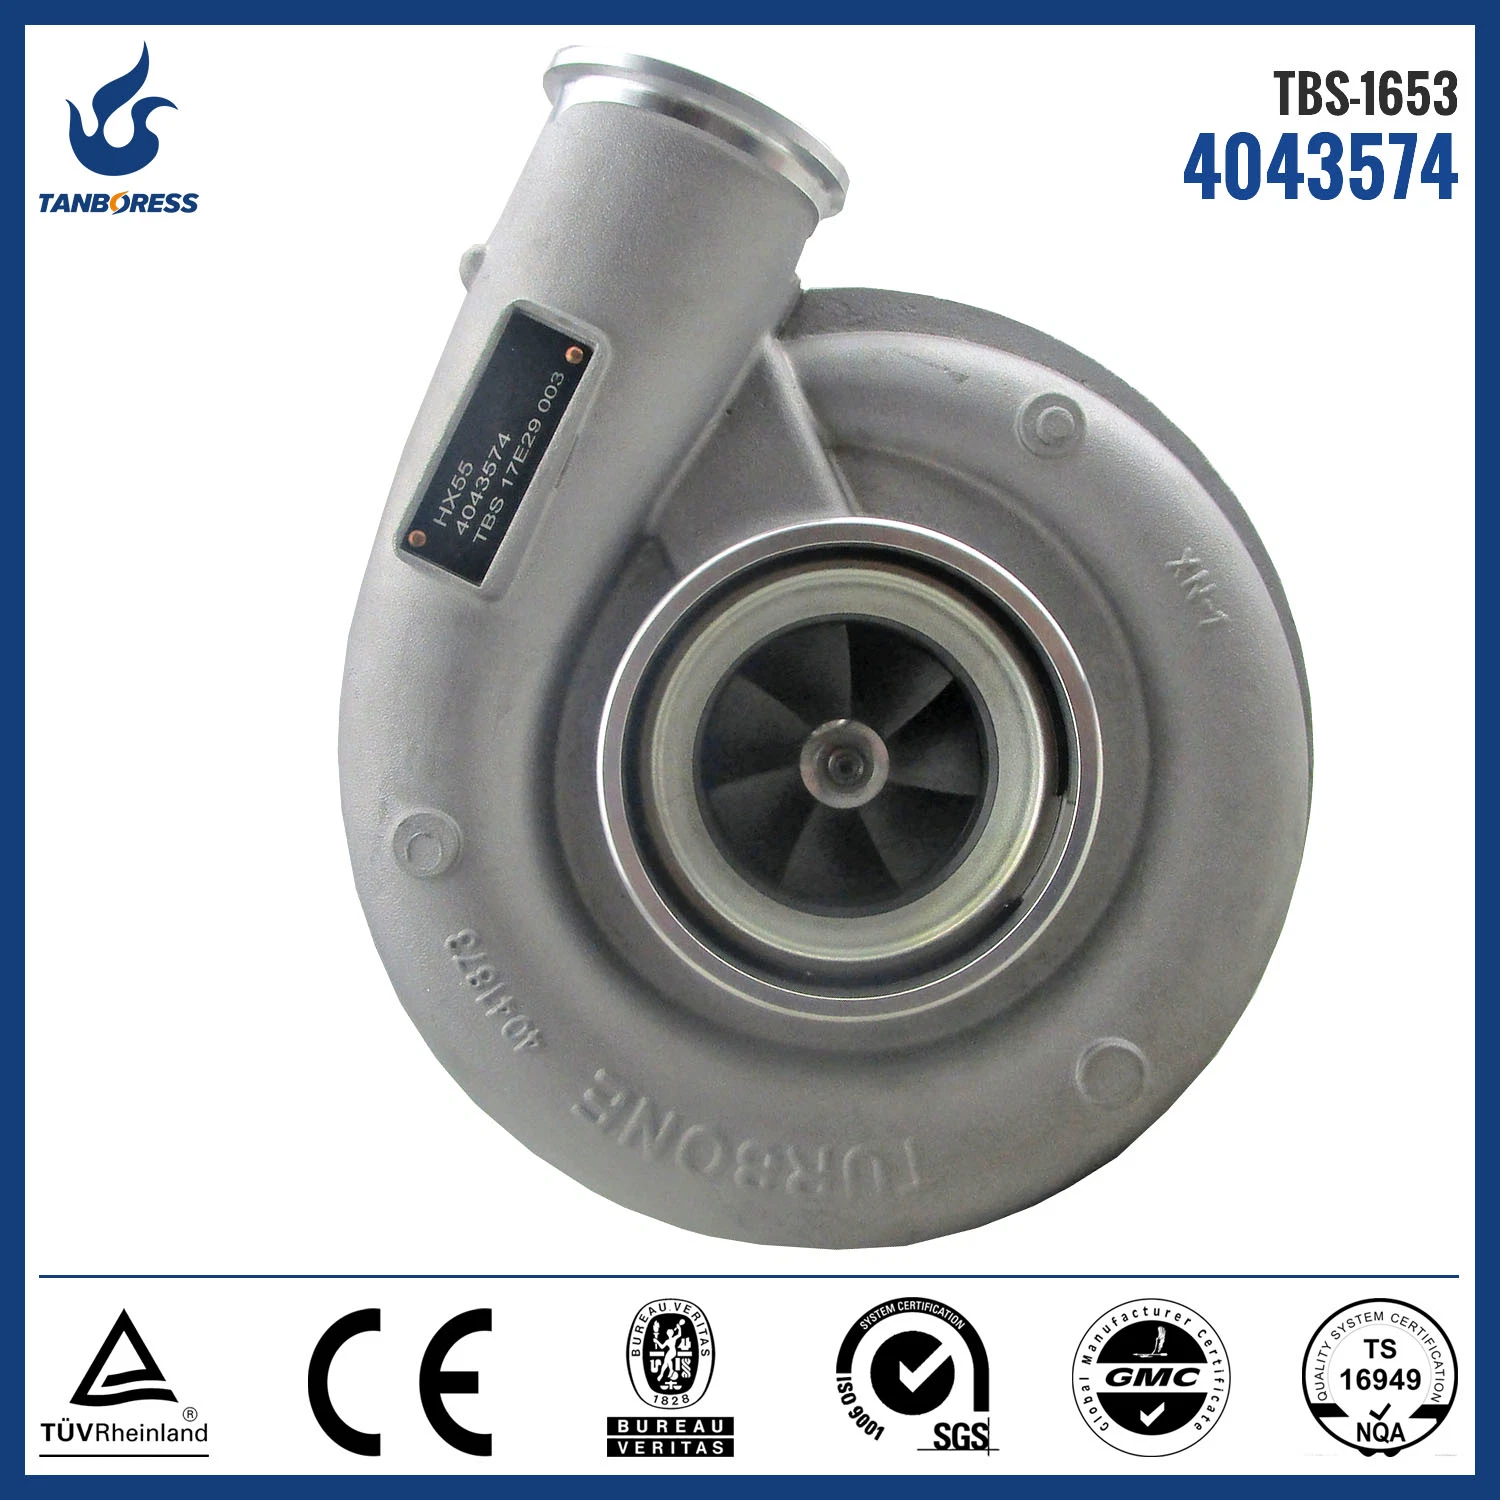 Volvo HX55 3792501 4043574 turbocharger CHRA turbo spare parts Enginer: MD11 MD11 Euro 3 for sale